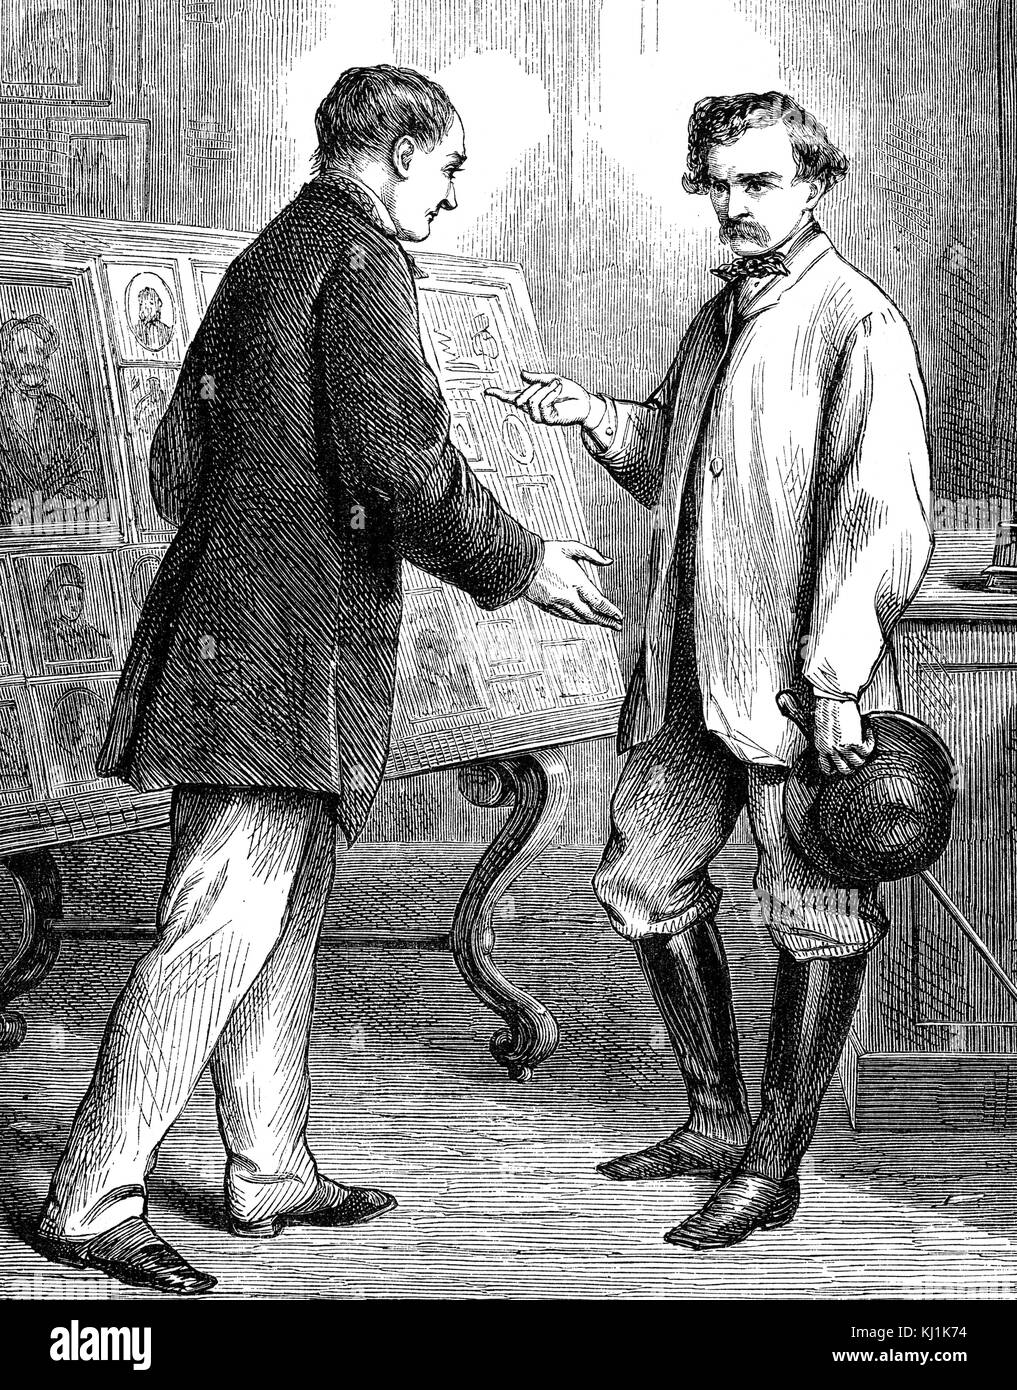 Engraving depicting a client examining a photographer's show pictures by Edward Hughes (1832-1908) a British illustrator and painter. Dated 19th Century Stock Photo